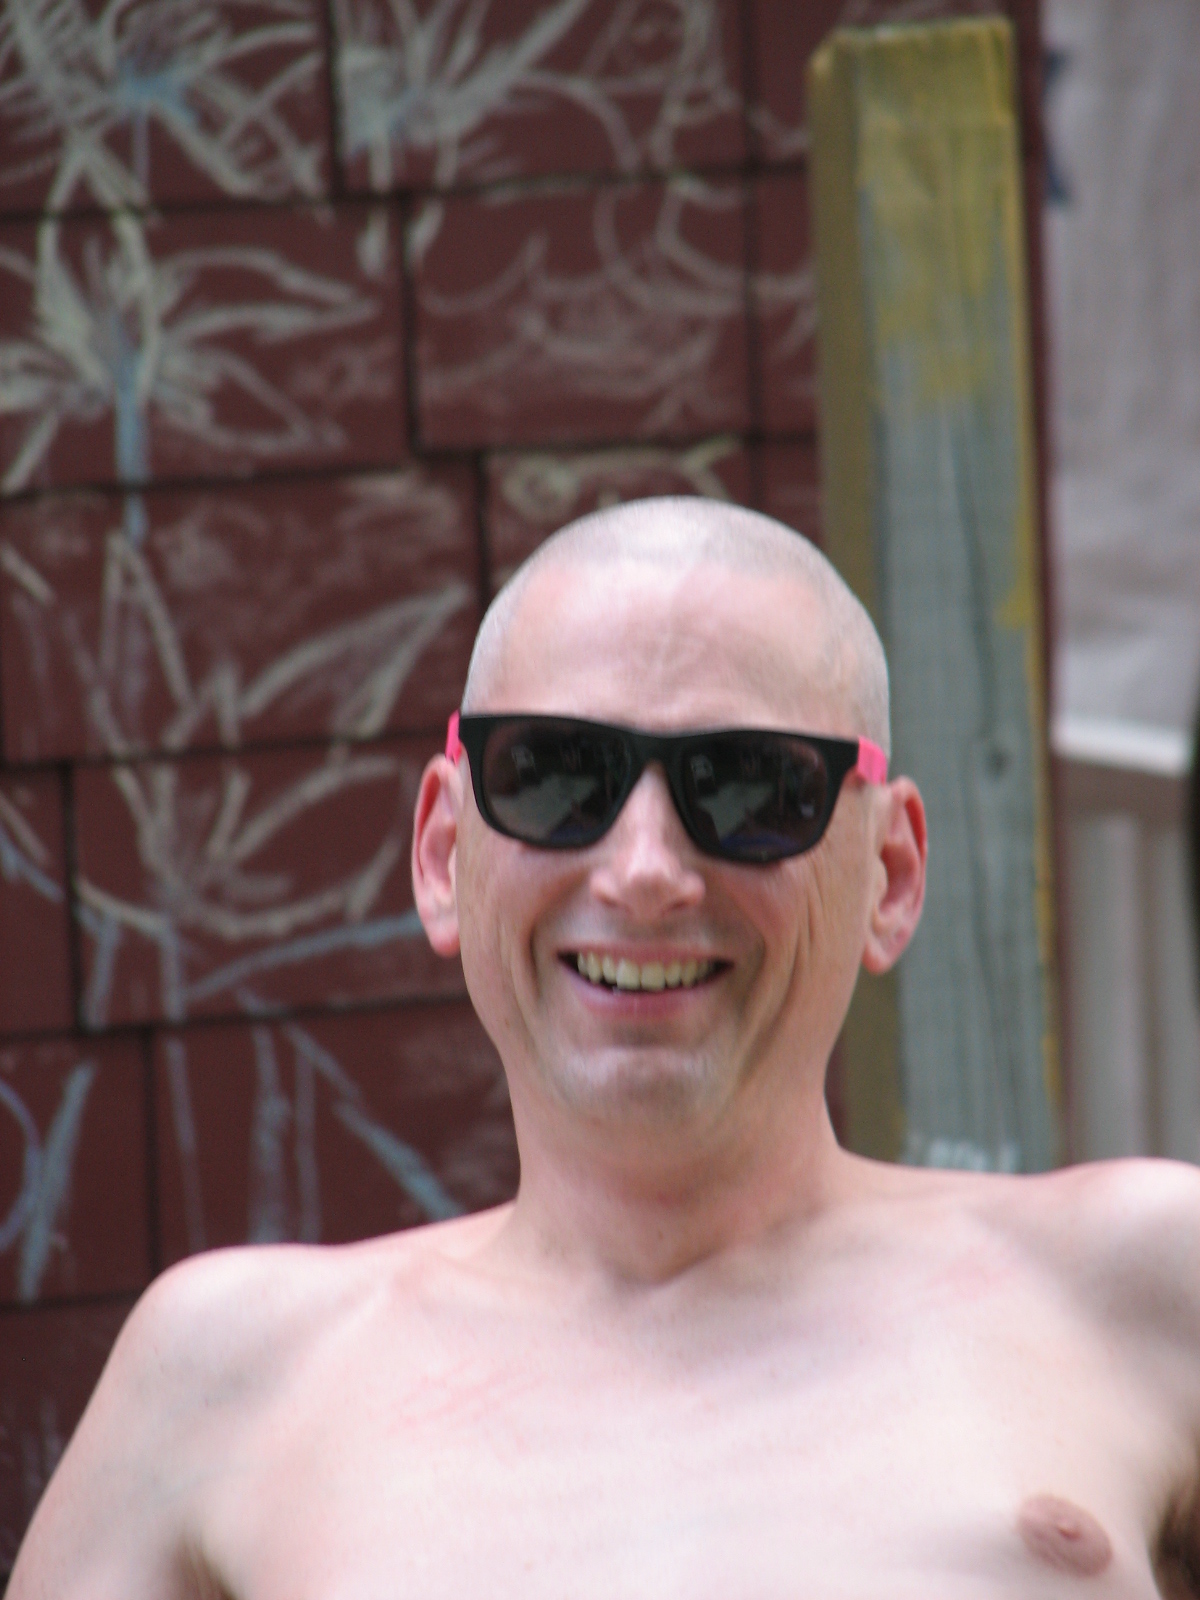 a shirtless man standing by a wall wearing sunglasses